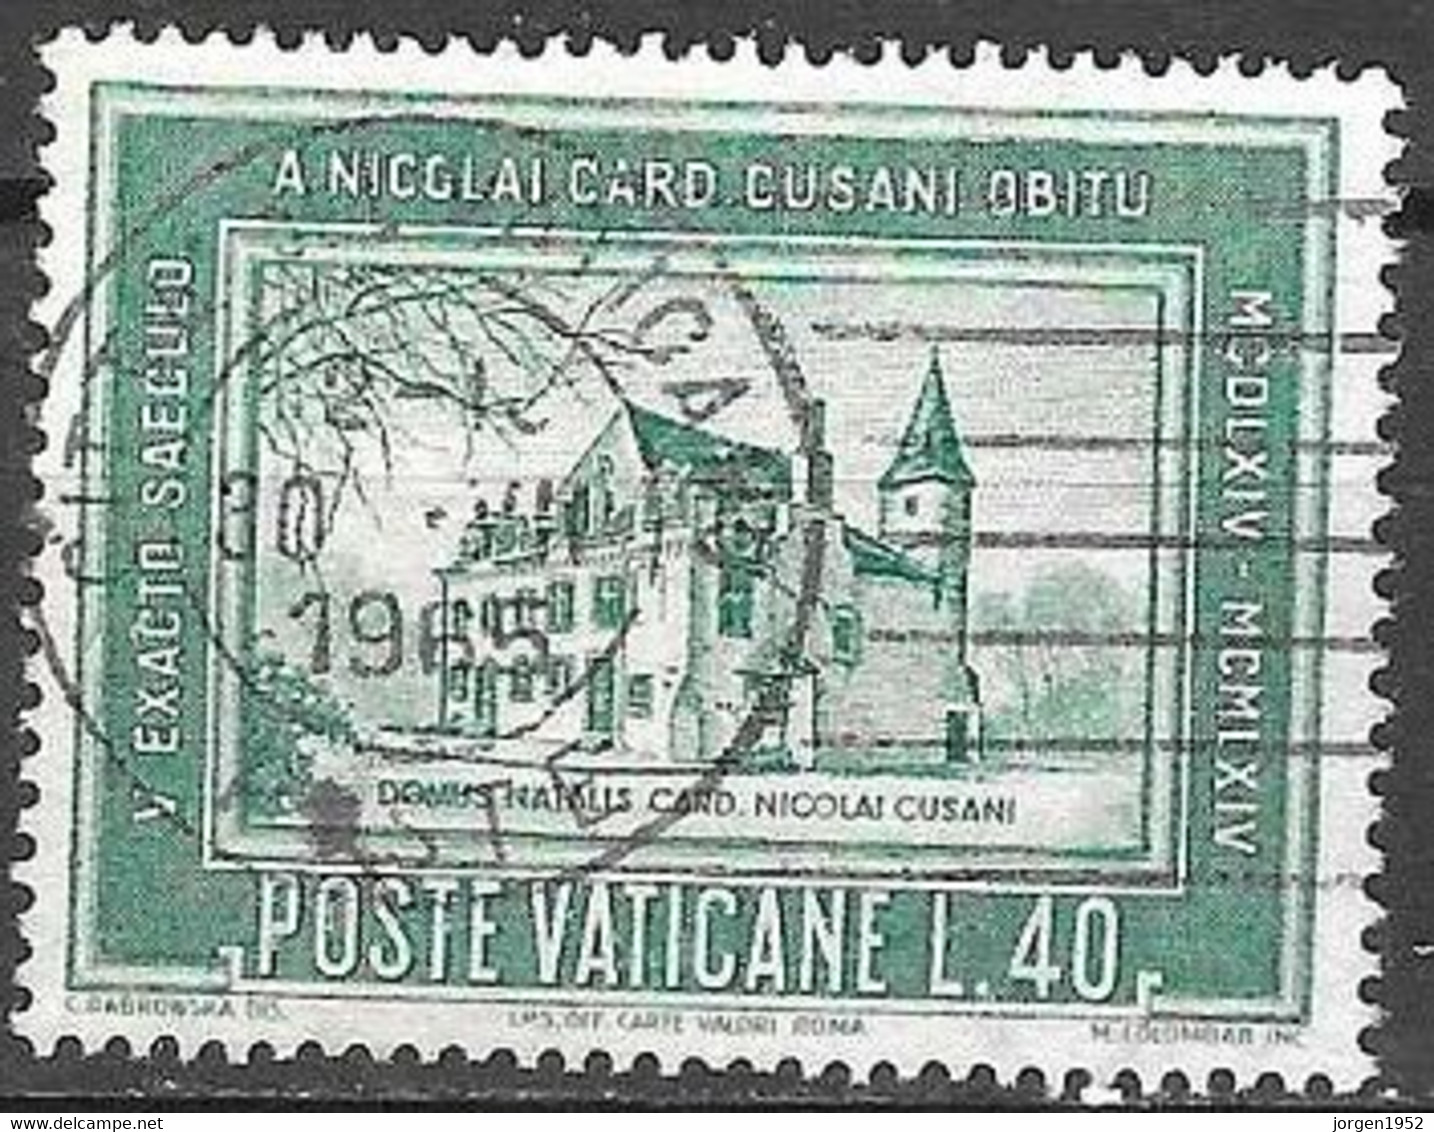 VATICAN # FROM 1964  STAMPWORLD 461 - Used Stamps